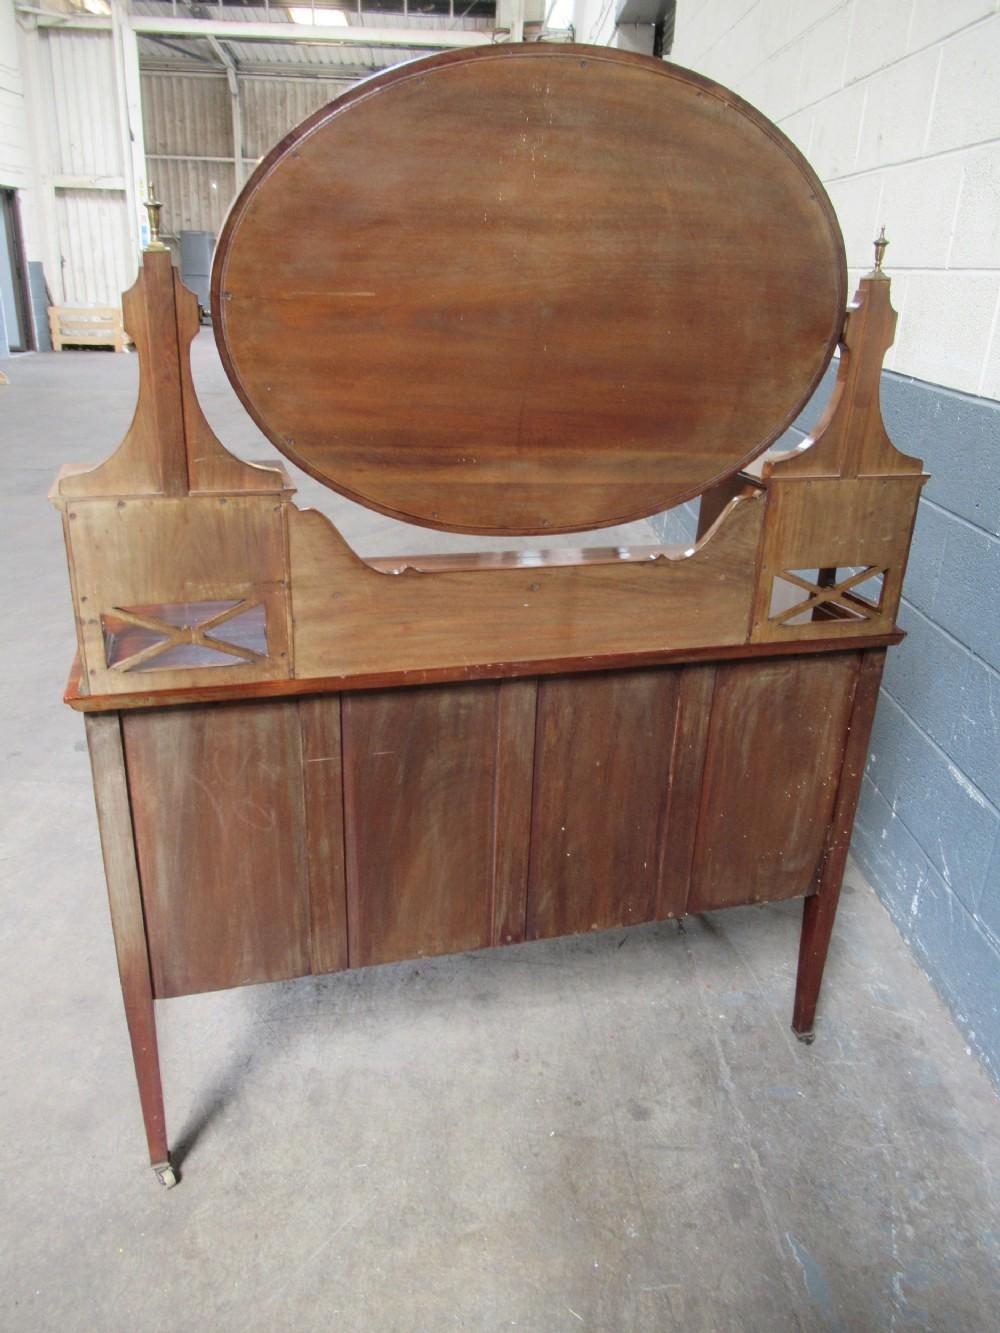 Hand-Crafted Lovely Antique English 19th C. inlaid flame mahogany Dressing Table or Vanity For Sale